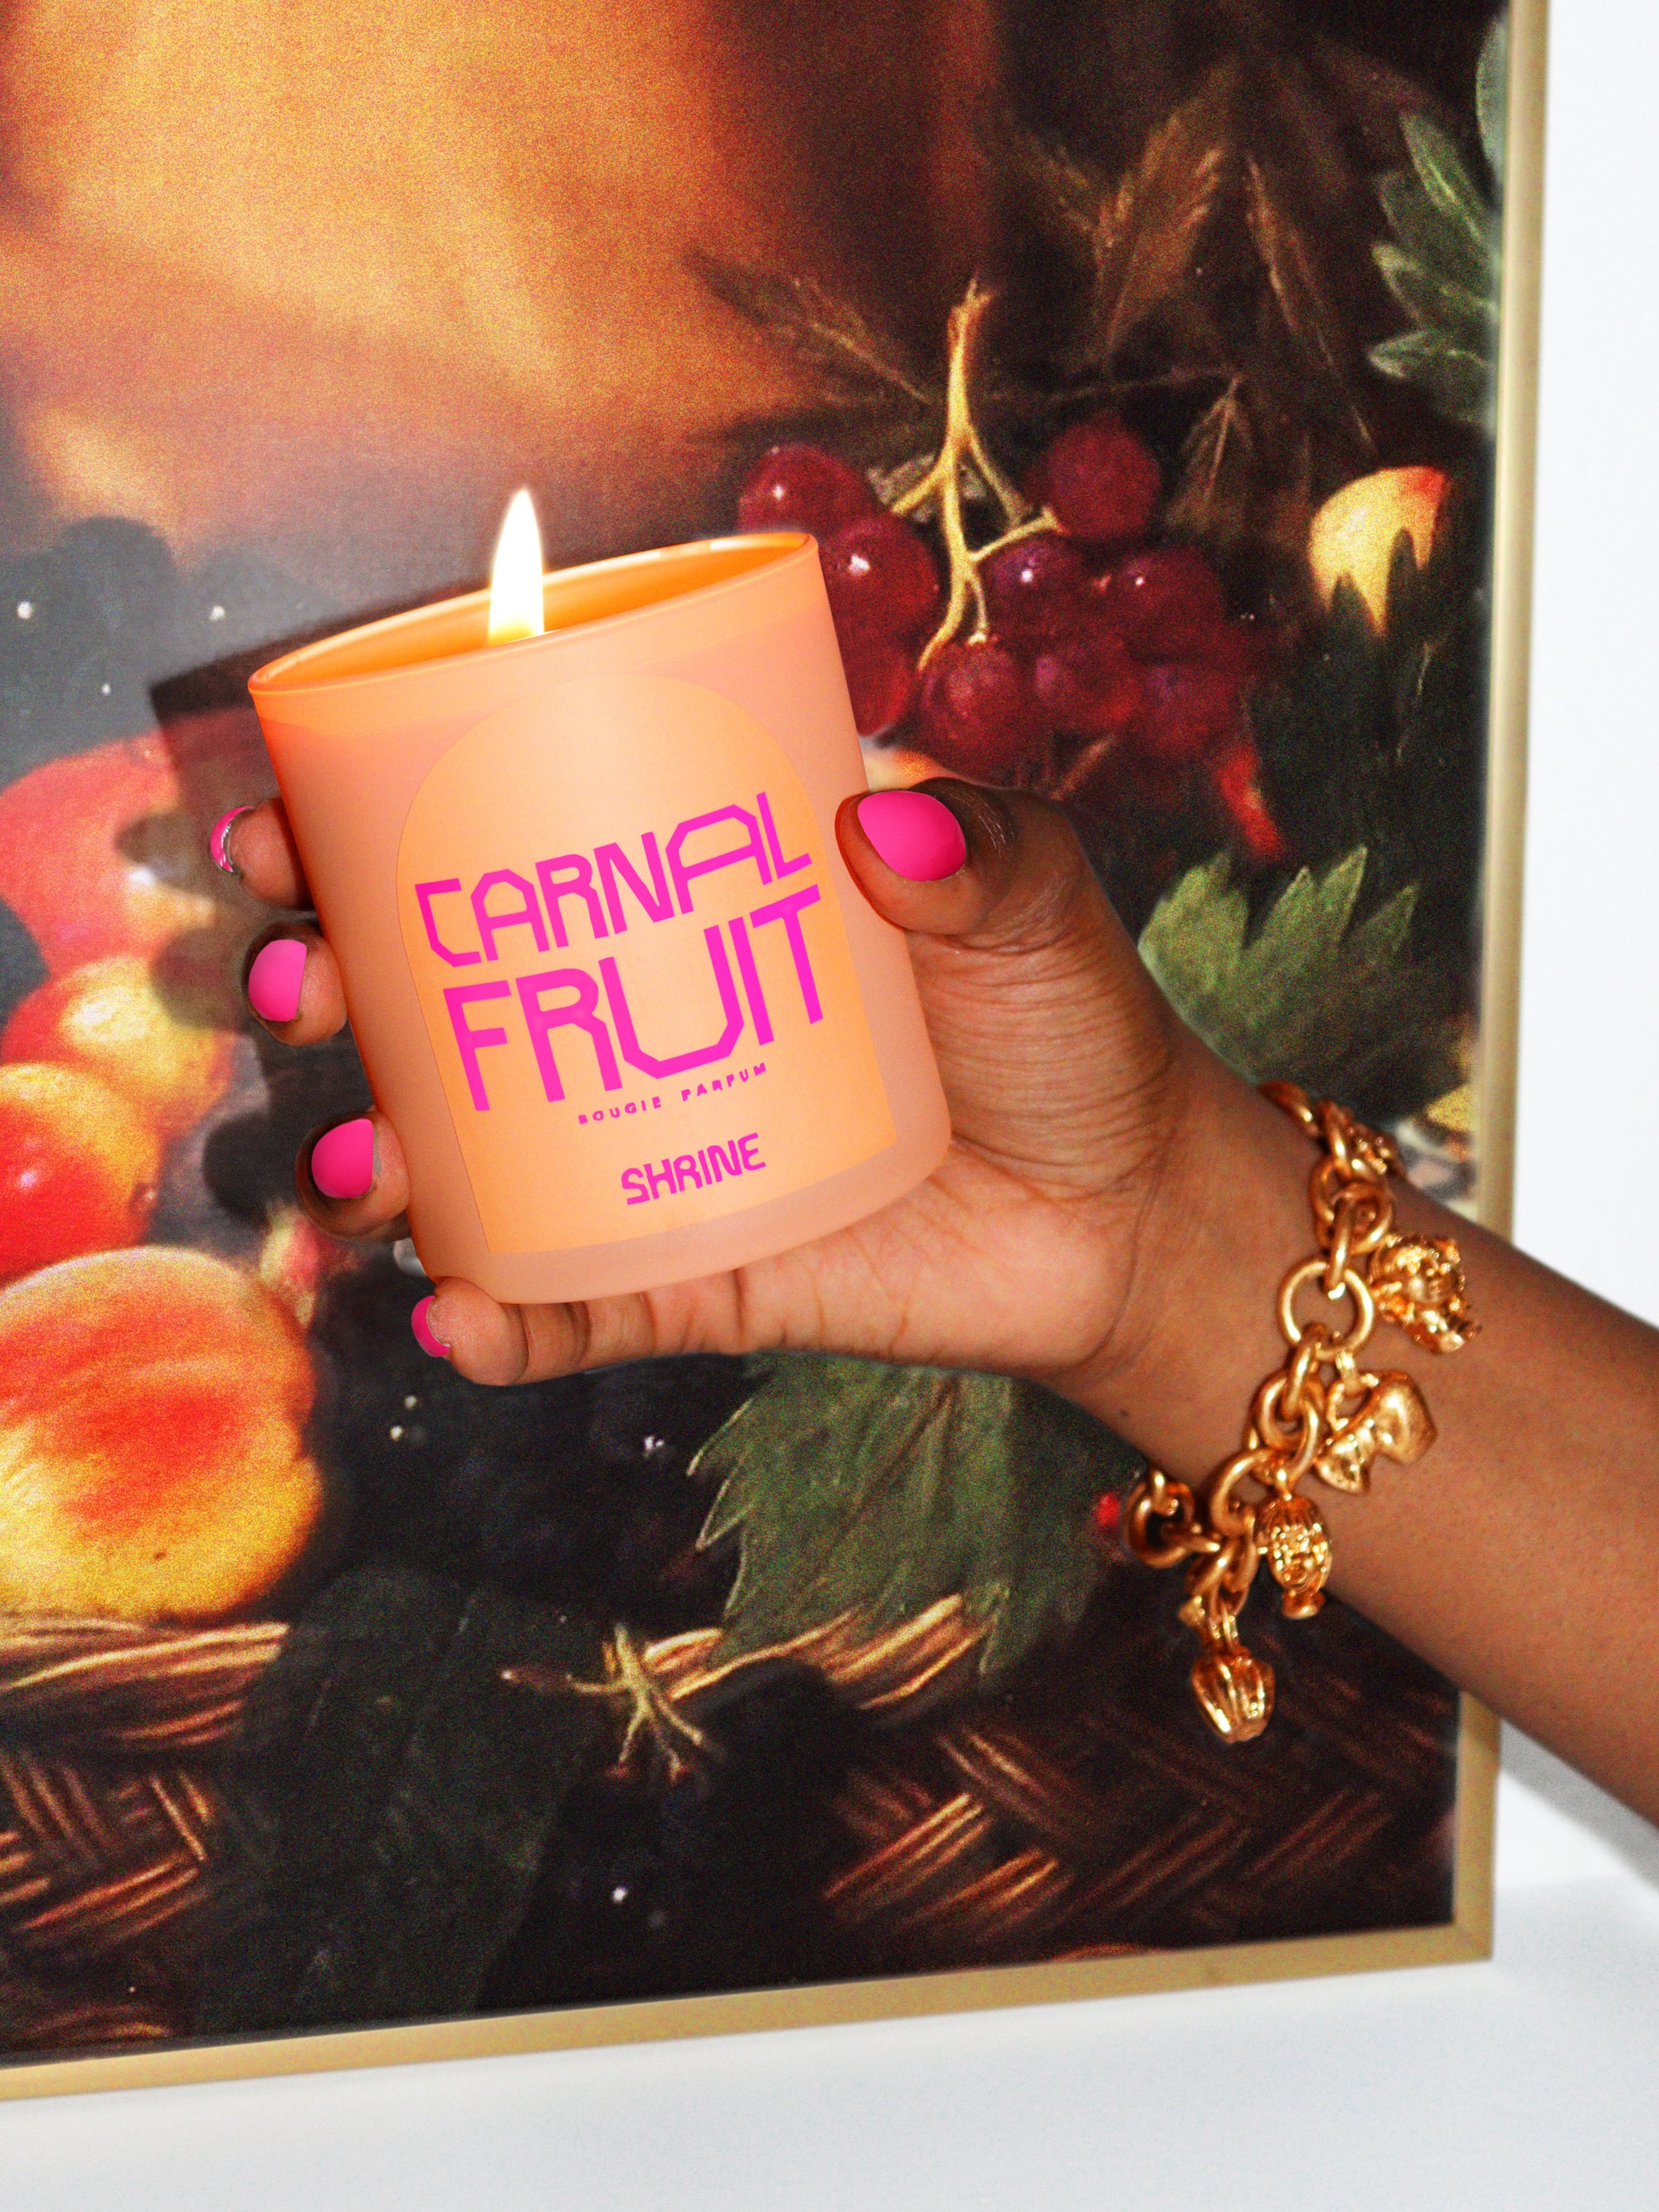 shrine carnal fruit monochromatic peach candle with neon pink text design in a hand with neon pink nails and gold charm bracelet in front of an oil painting of a fruit basket shop shrine